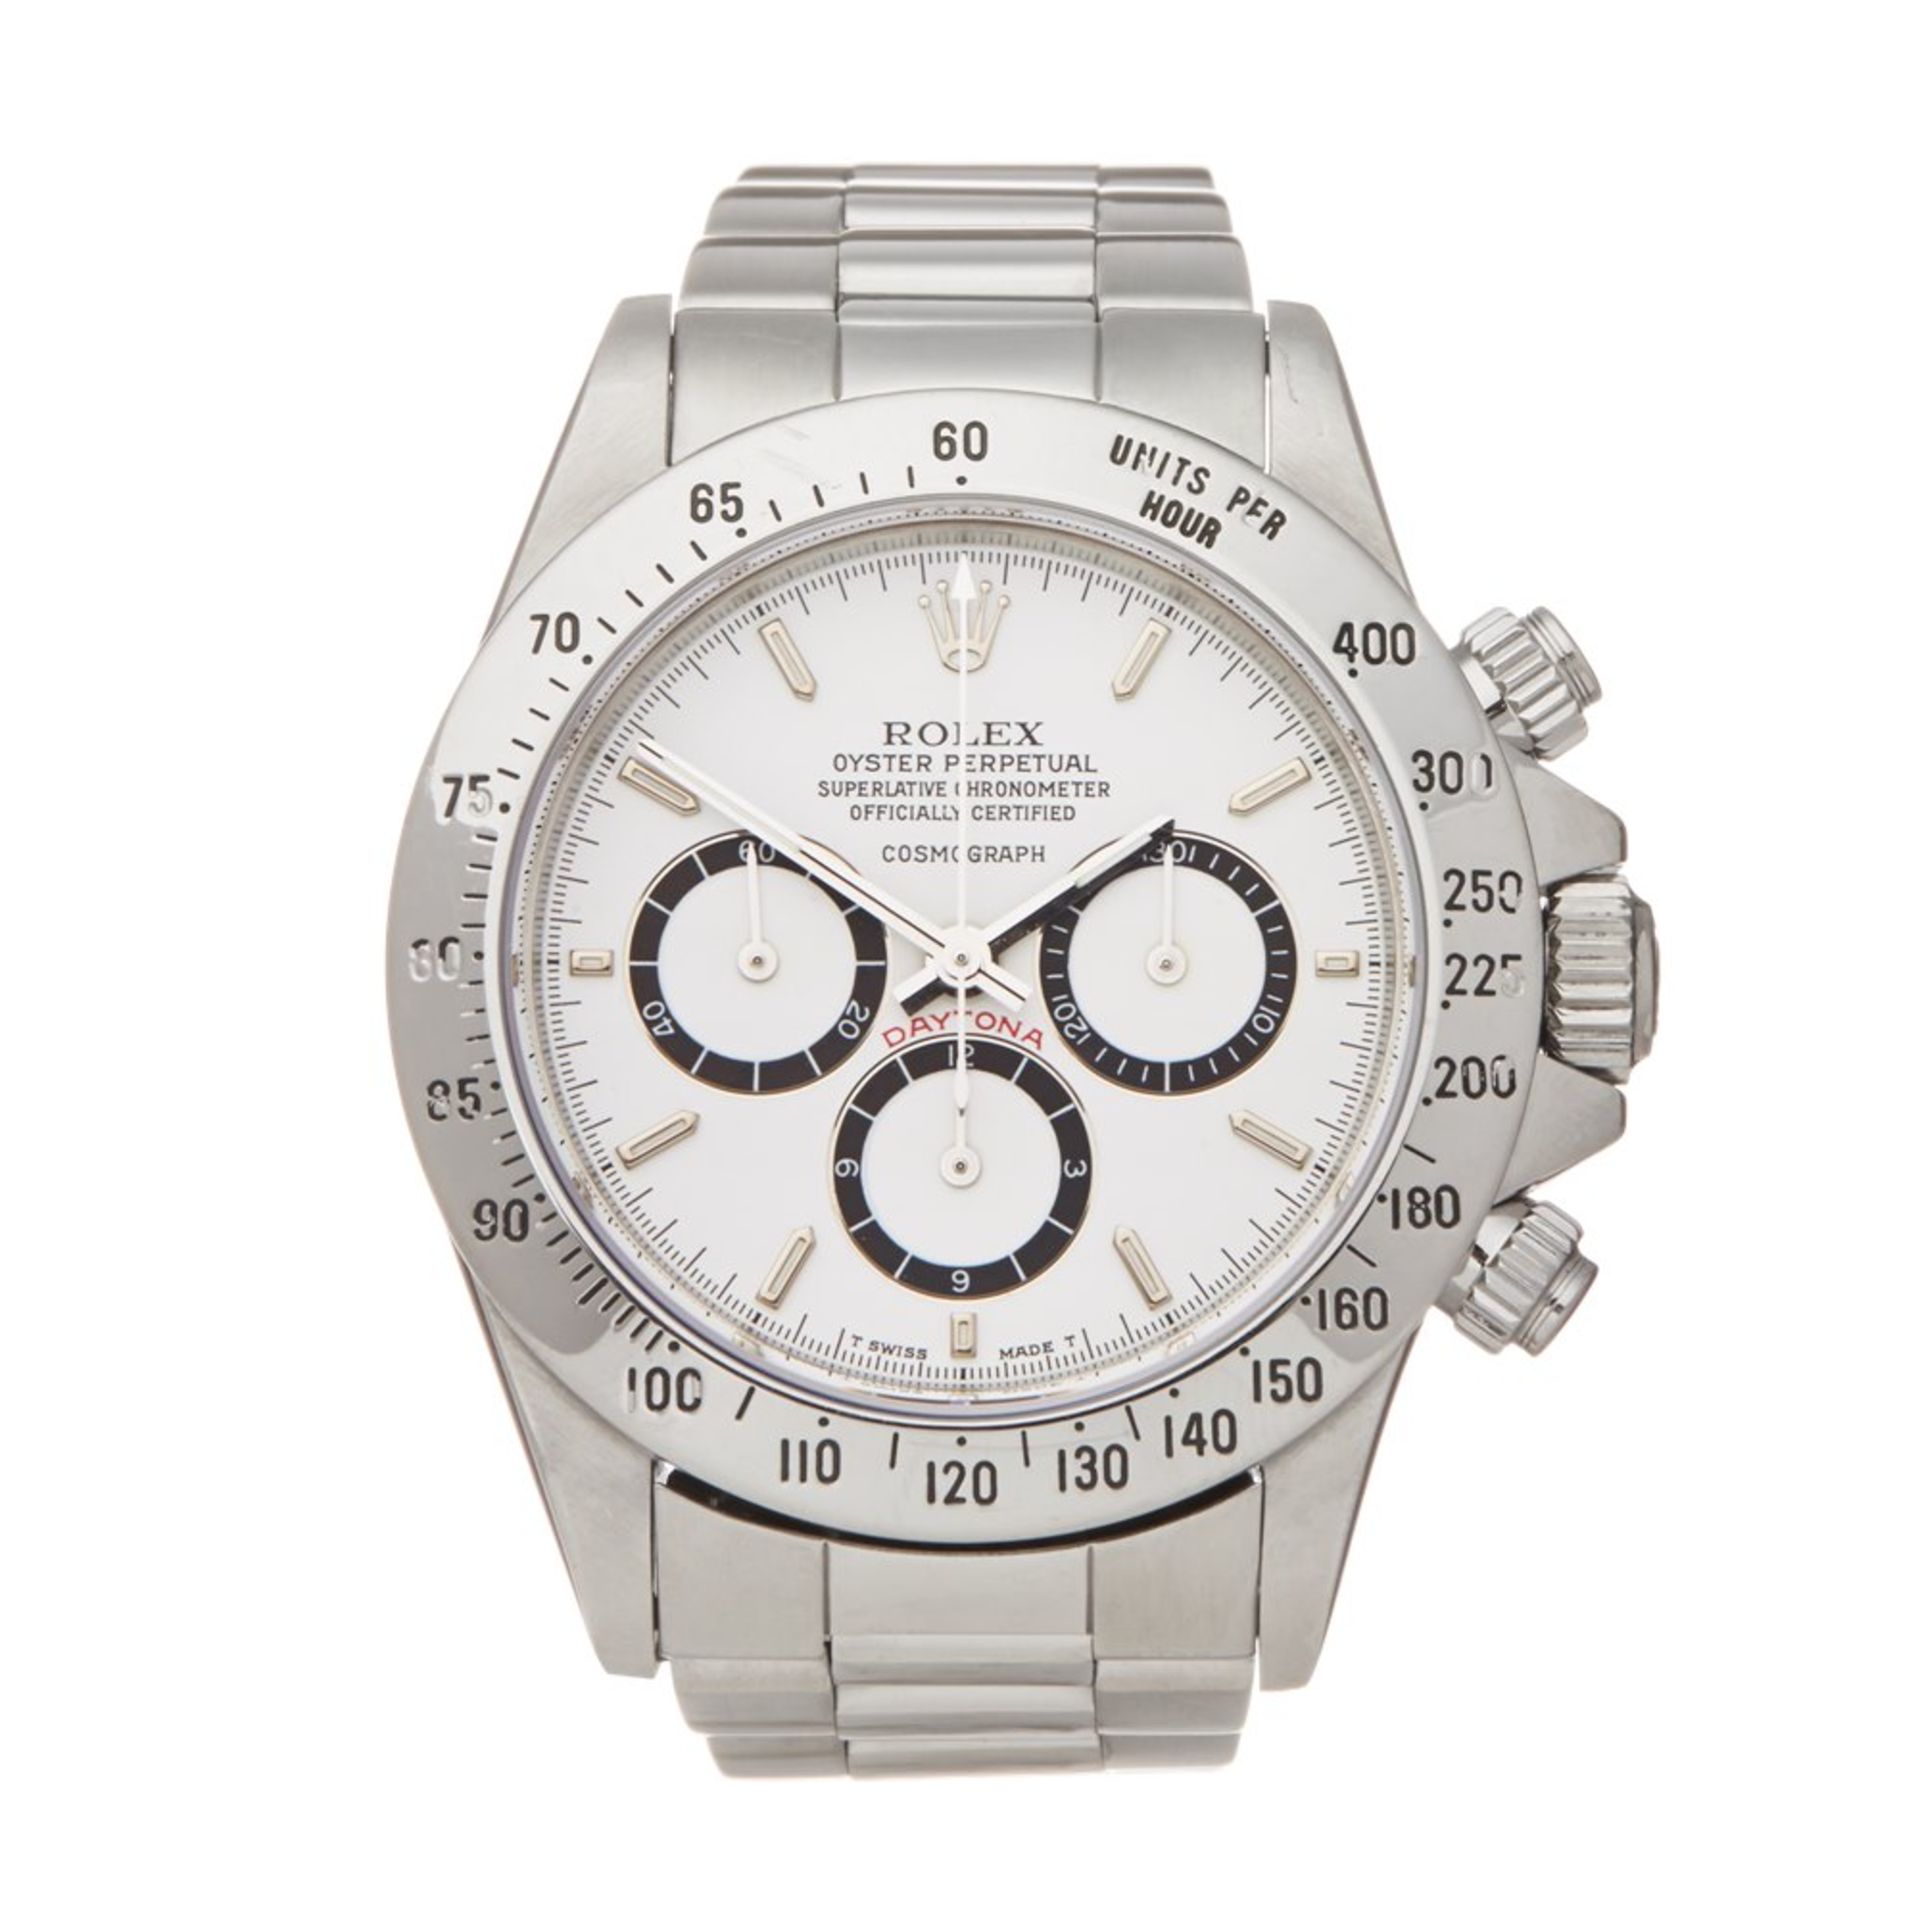 Rolex Daytona Floating Cosmograph Stainless Steel - 16520 - Image 2 of 9